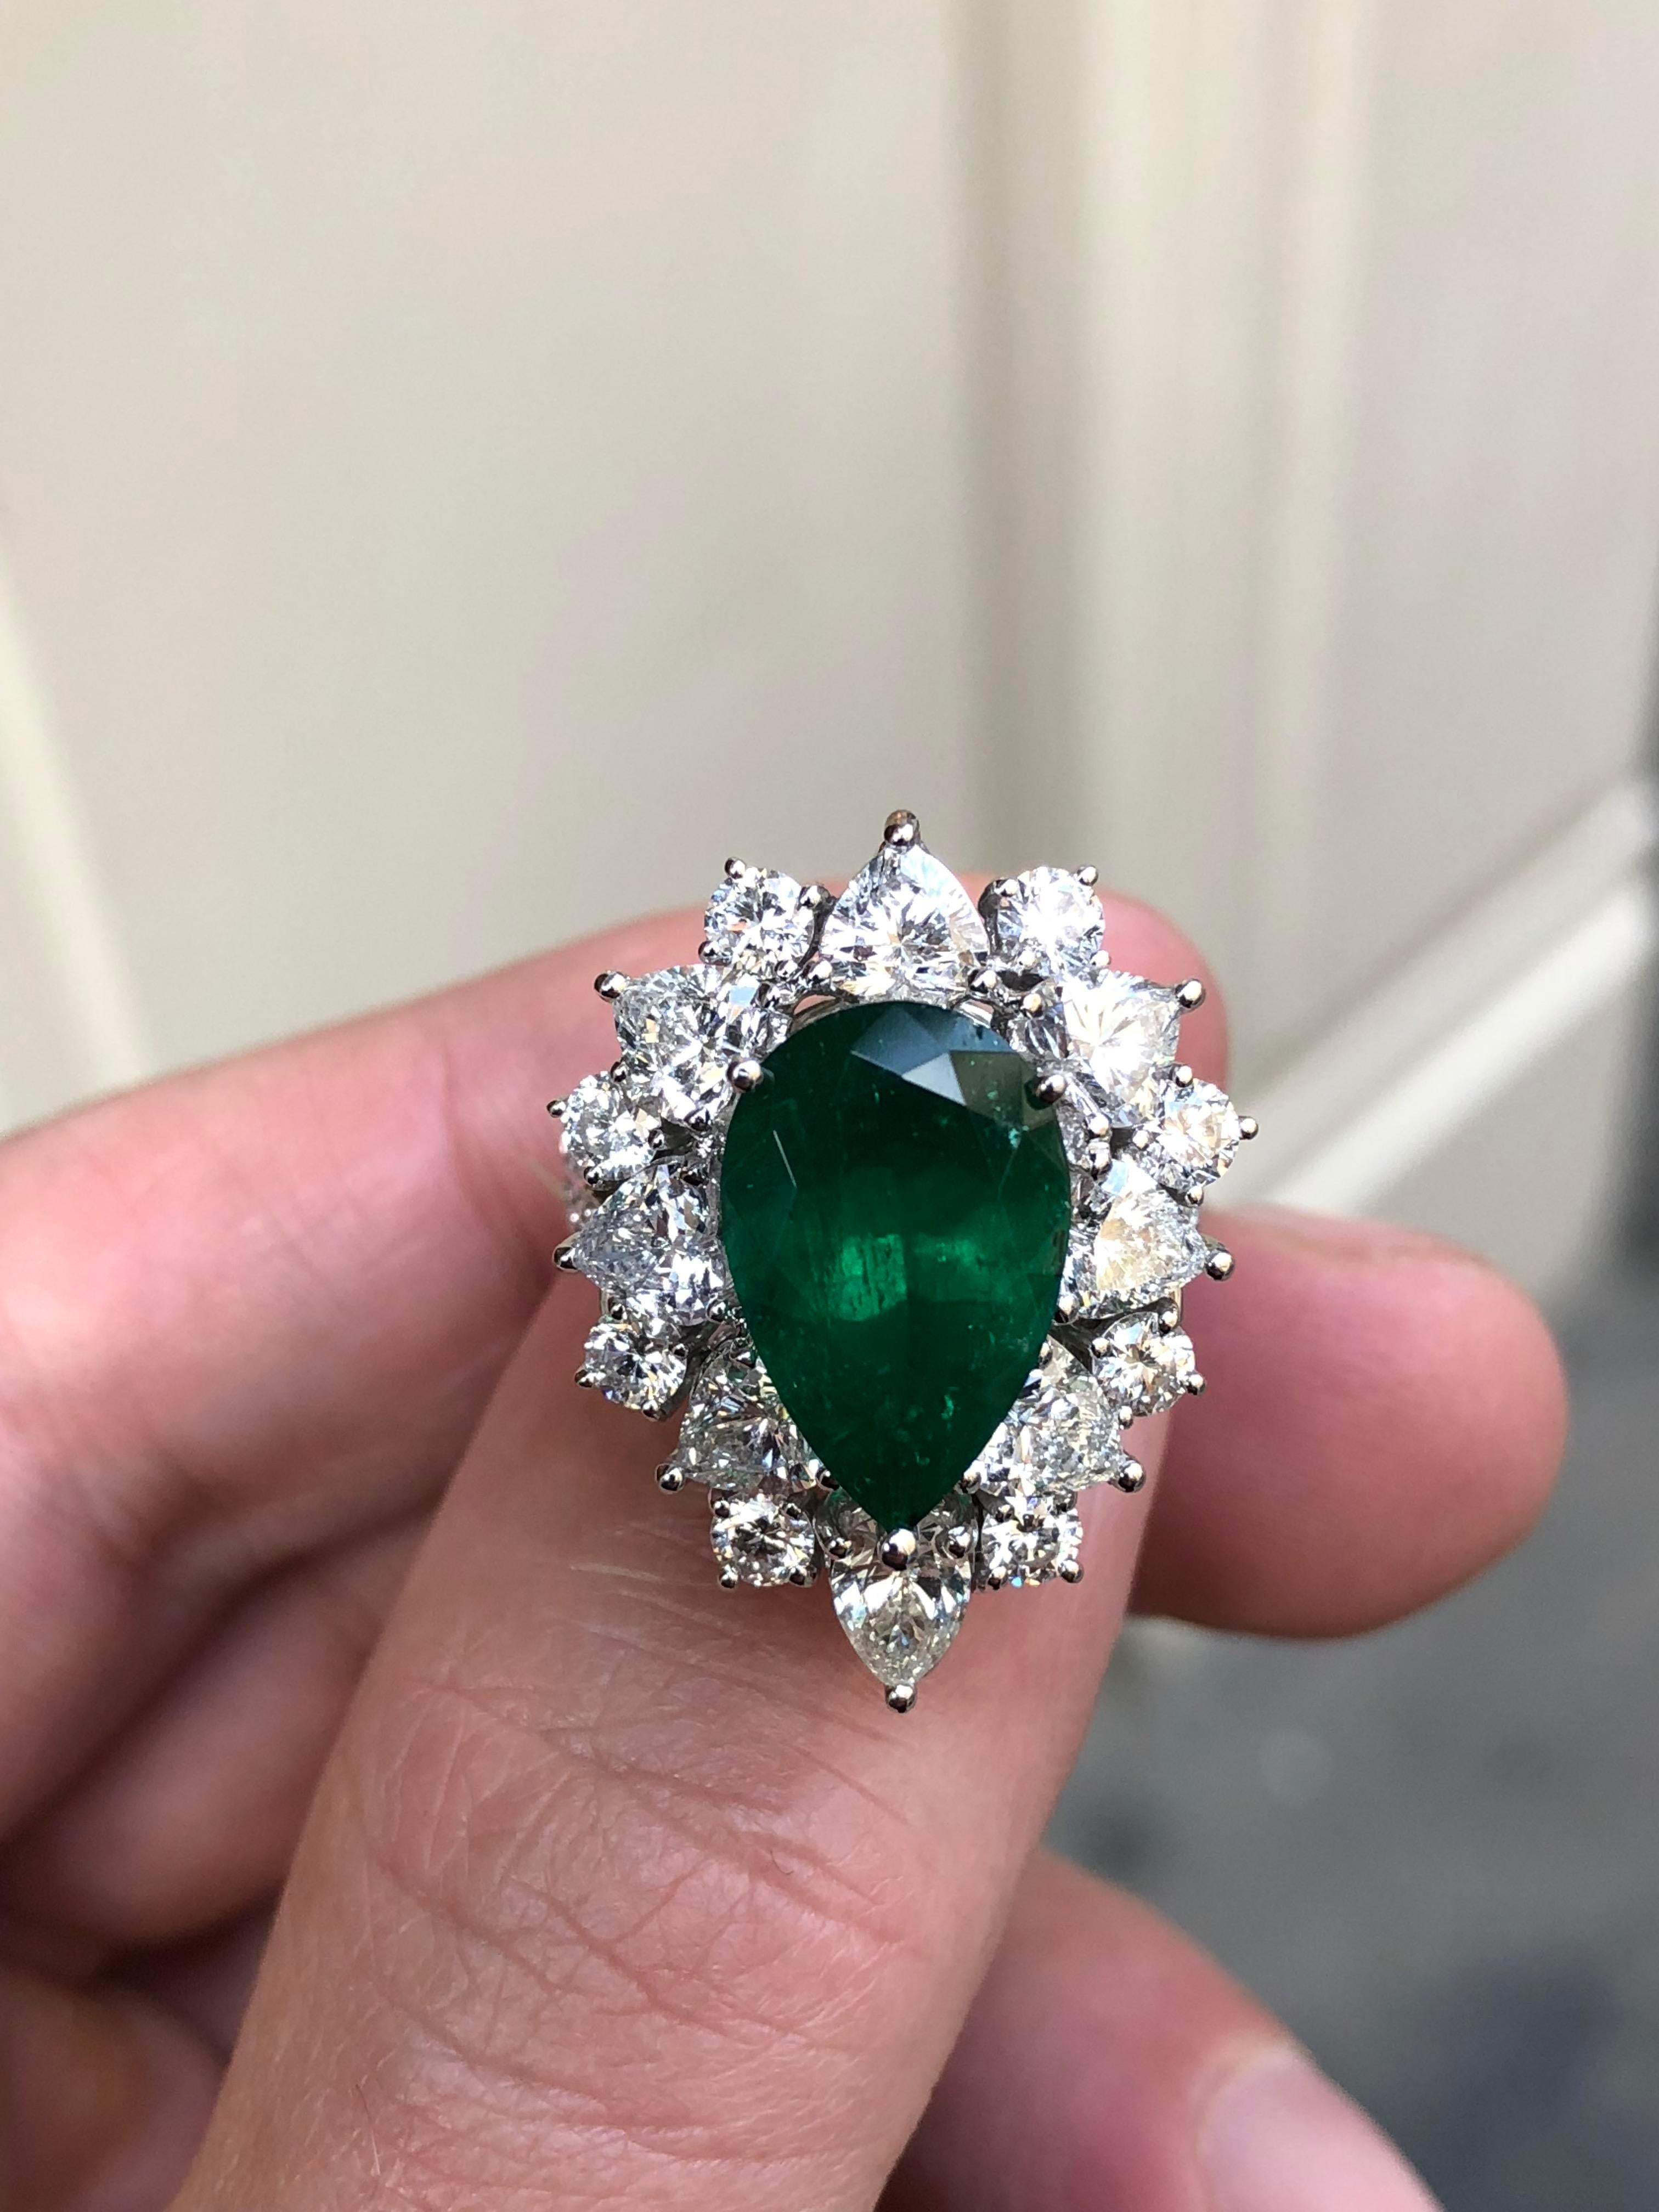 3.95 Carat Pear Cut Colombian Emerald Ring with Detachable Diamond Adorned Shank For Sale 1